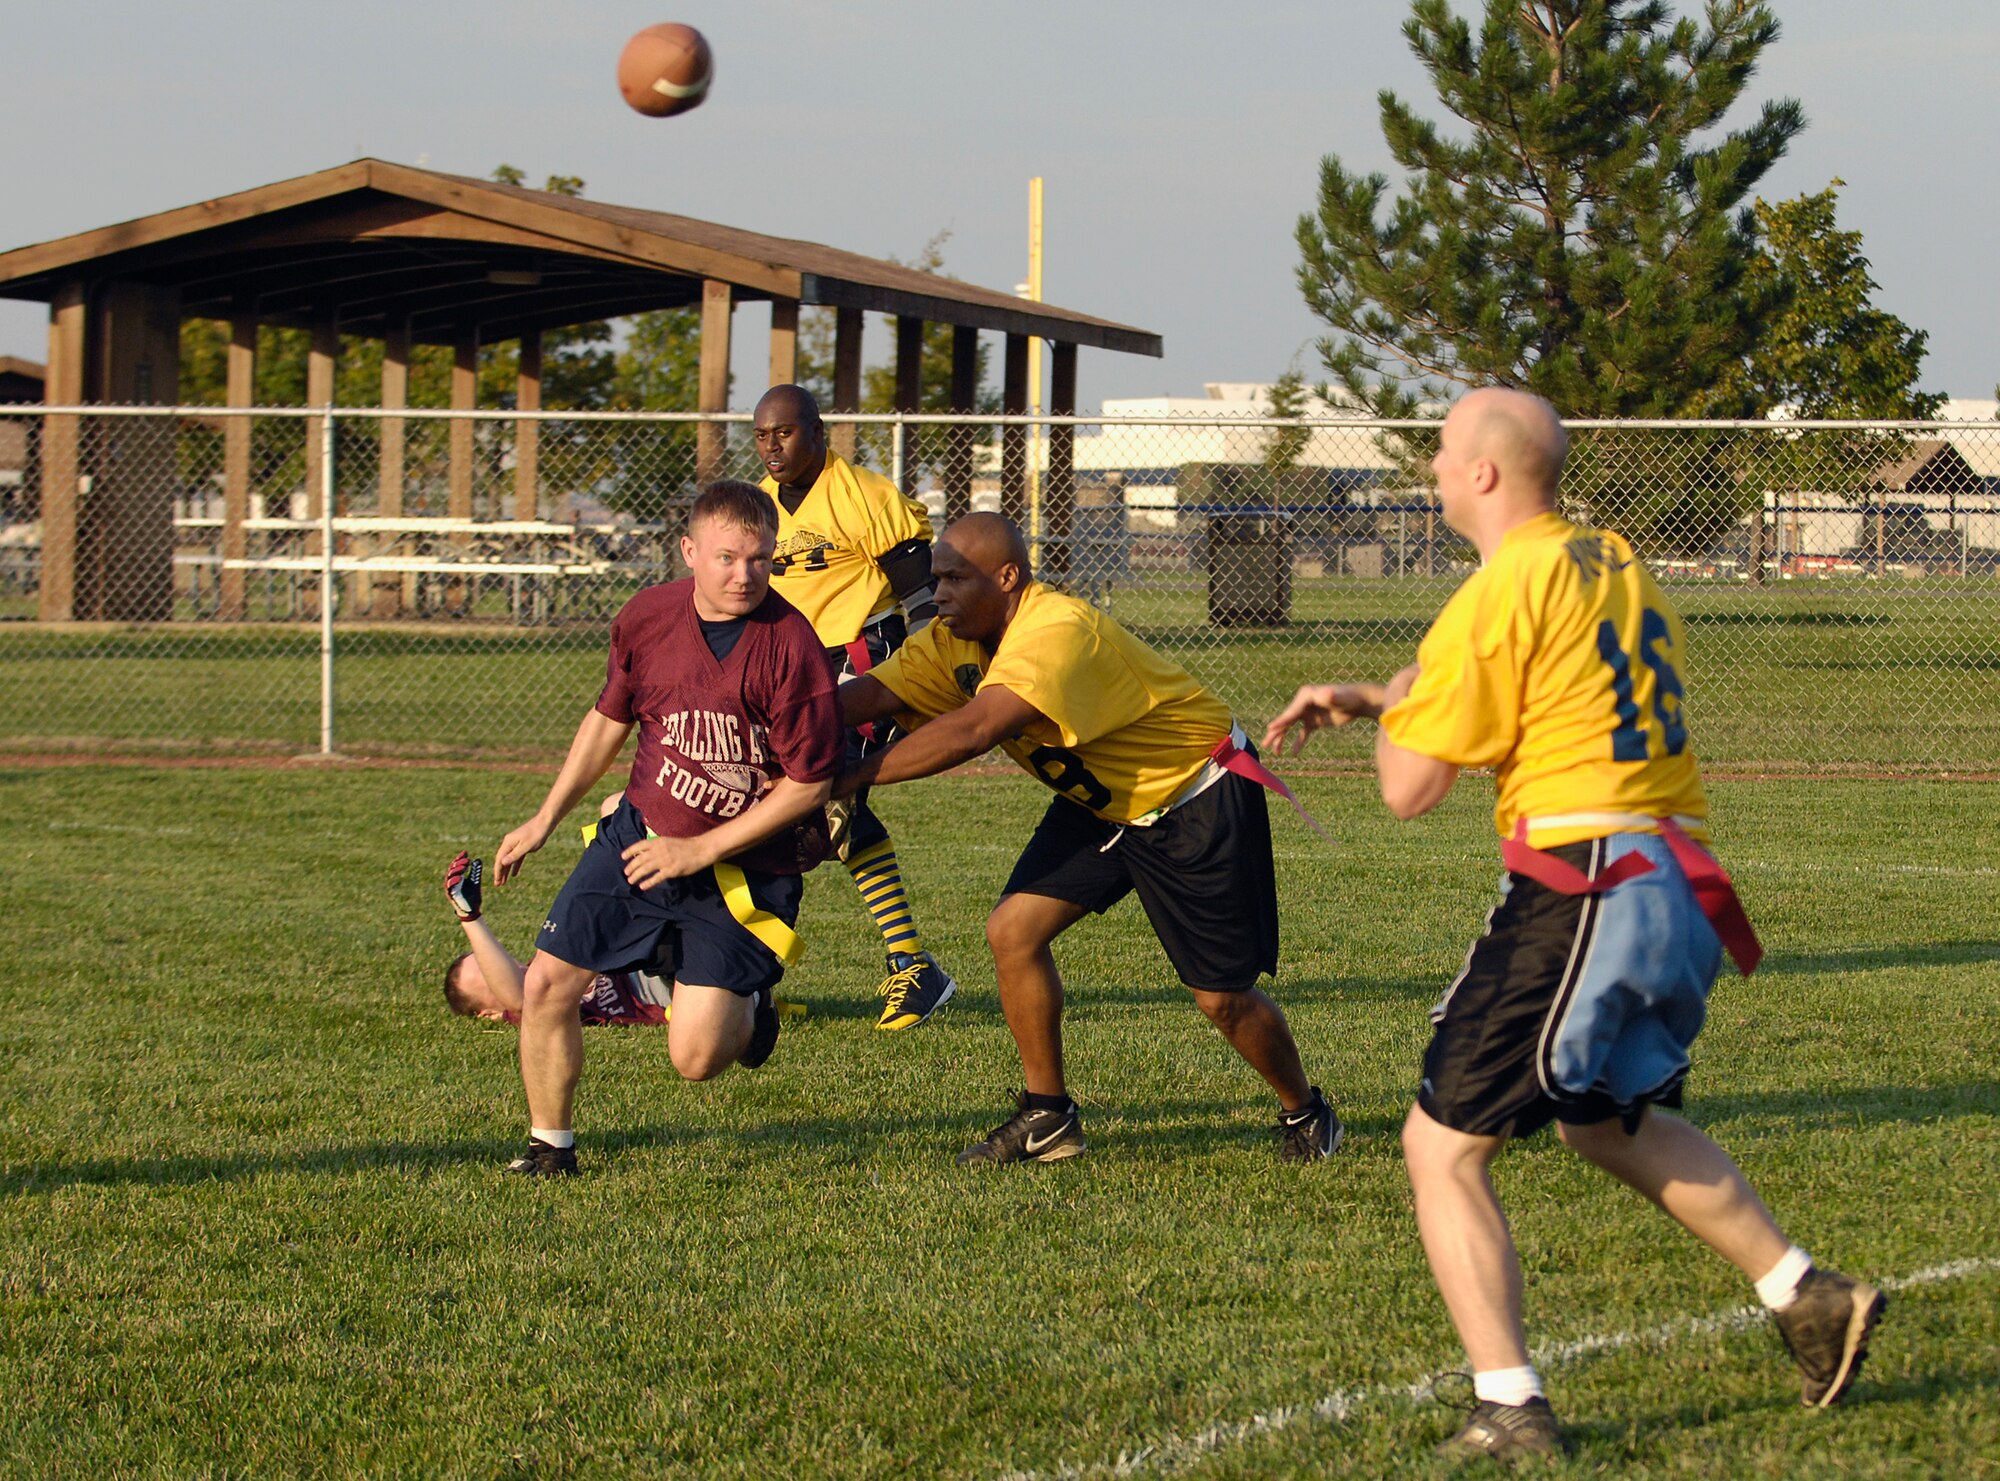 A defensive linemen from the 744th Communications Group rushes the quaterback from White House Communications Agency Sept. 18 in a game during the first week of Bolling's flag football competition. The CG went on to beat WHCA, 24 - 19. (U.S. Air Force photo by Senior Airman Dan DeCook)